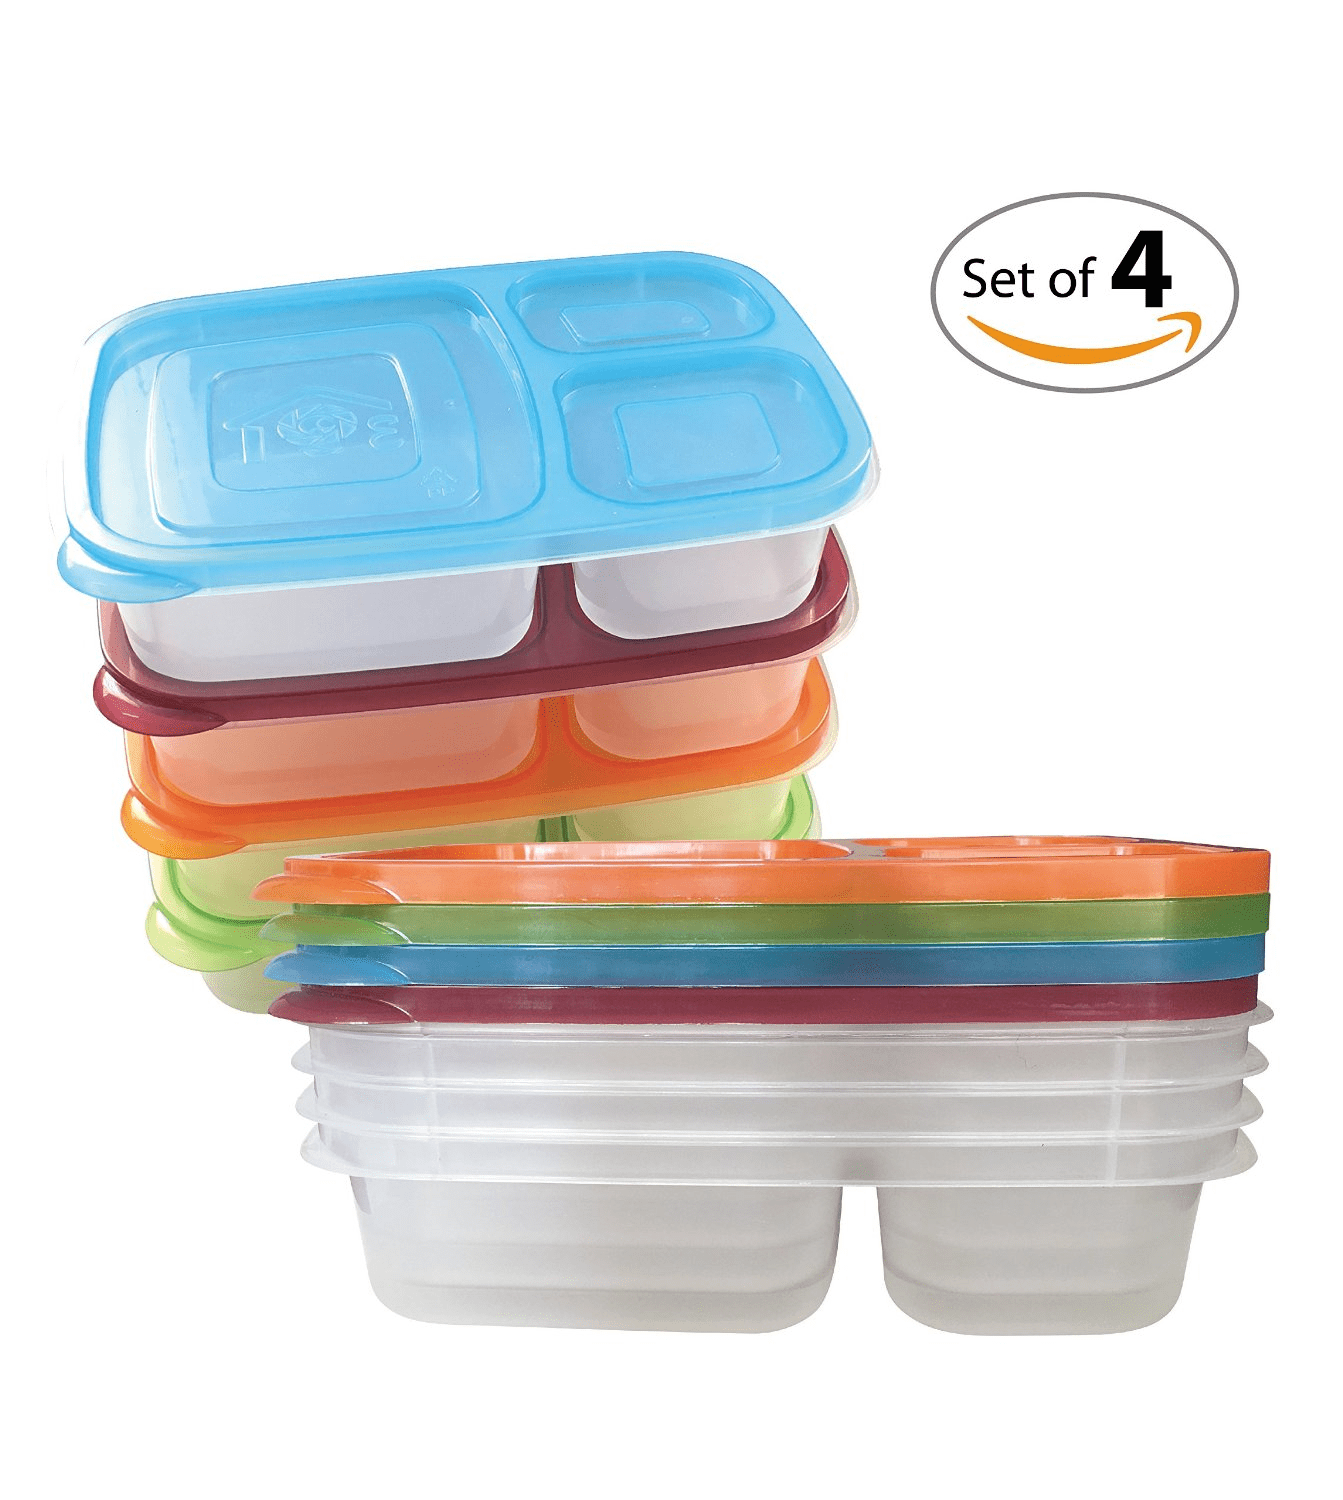 Bento Lunch Boxes - Marg's Product Reviews